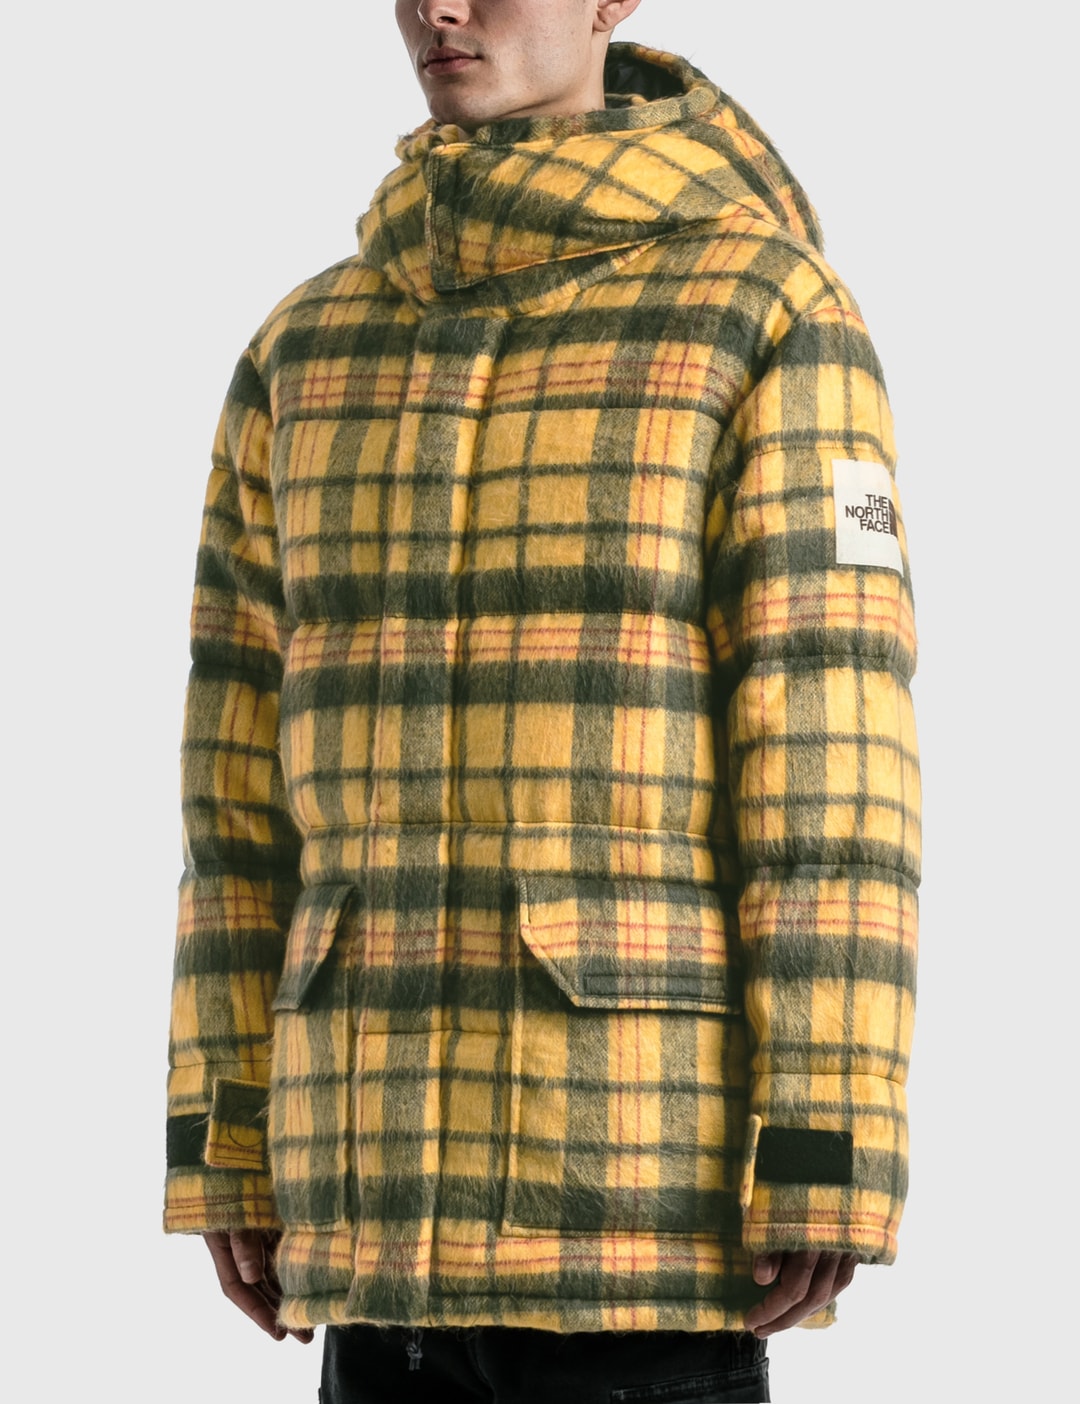 The North Face - Brown Label Down Parka | HBX - Globally Curated ...